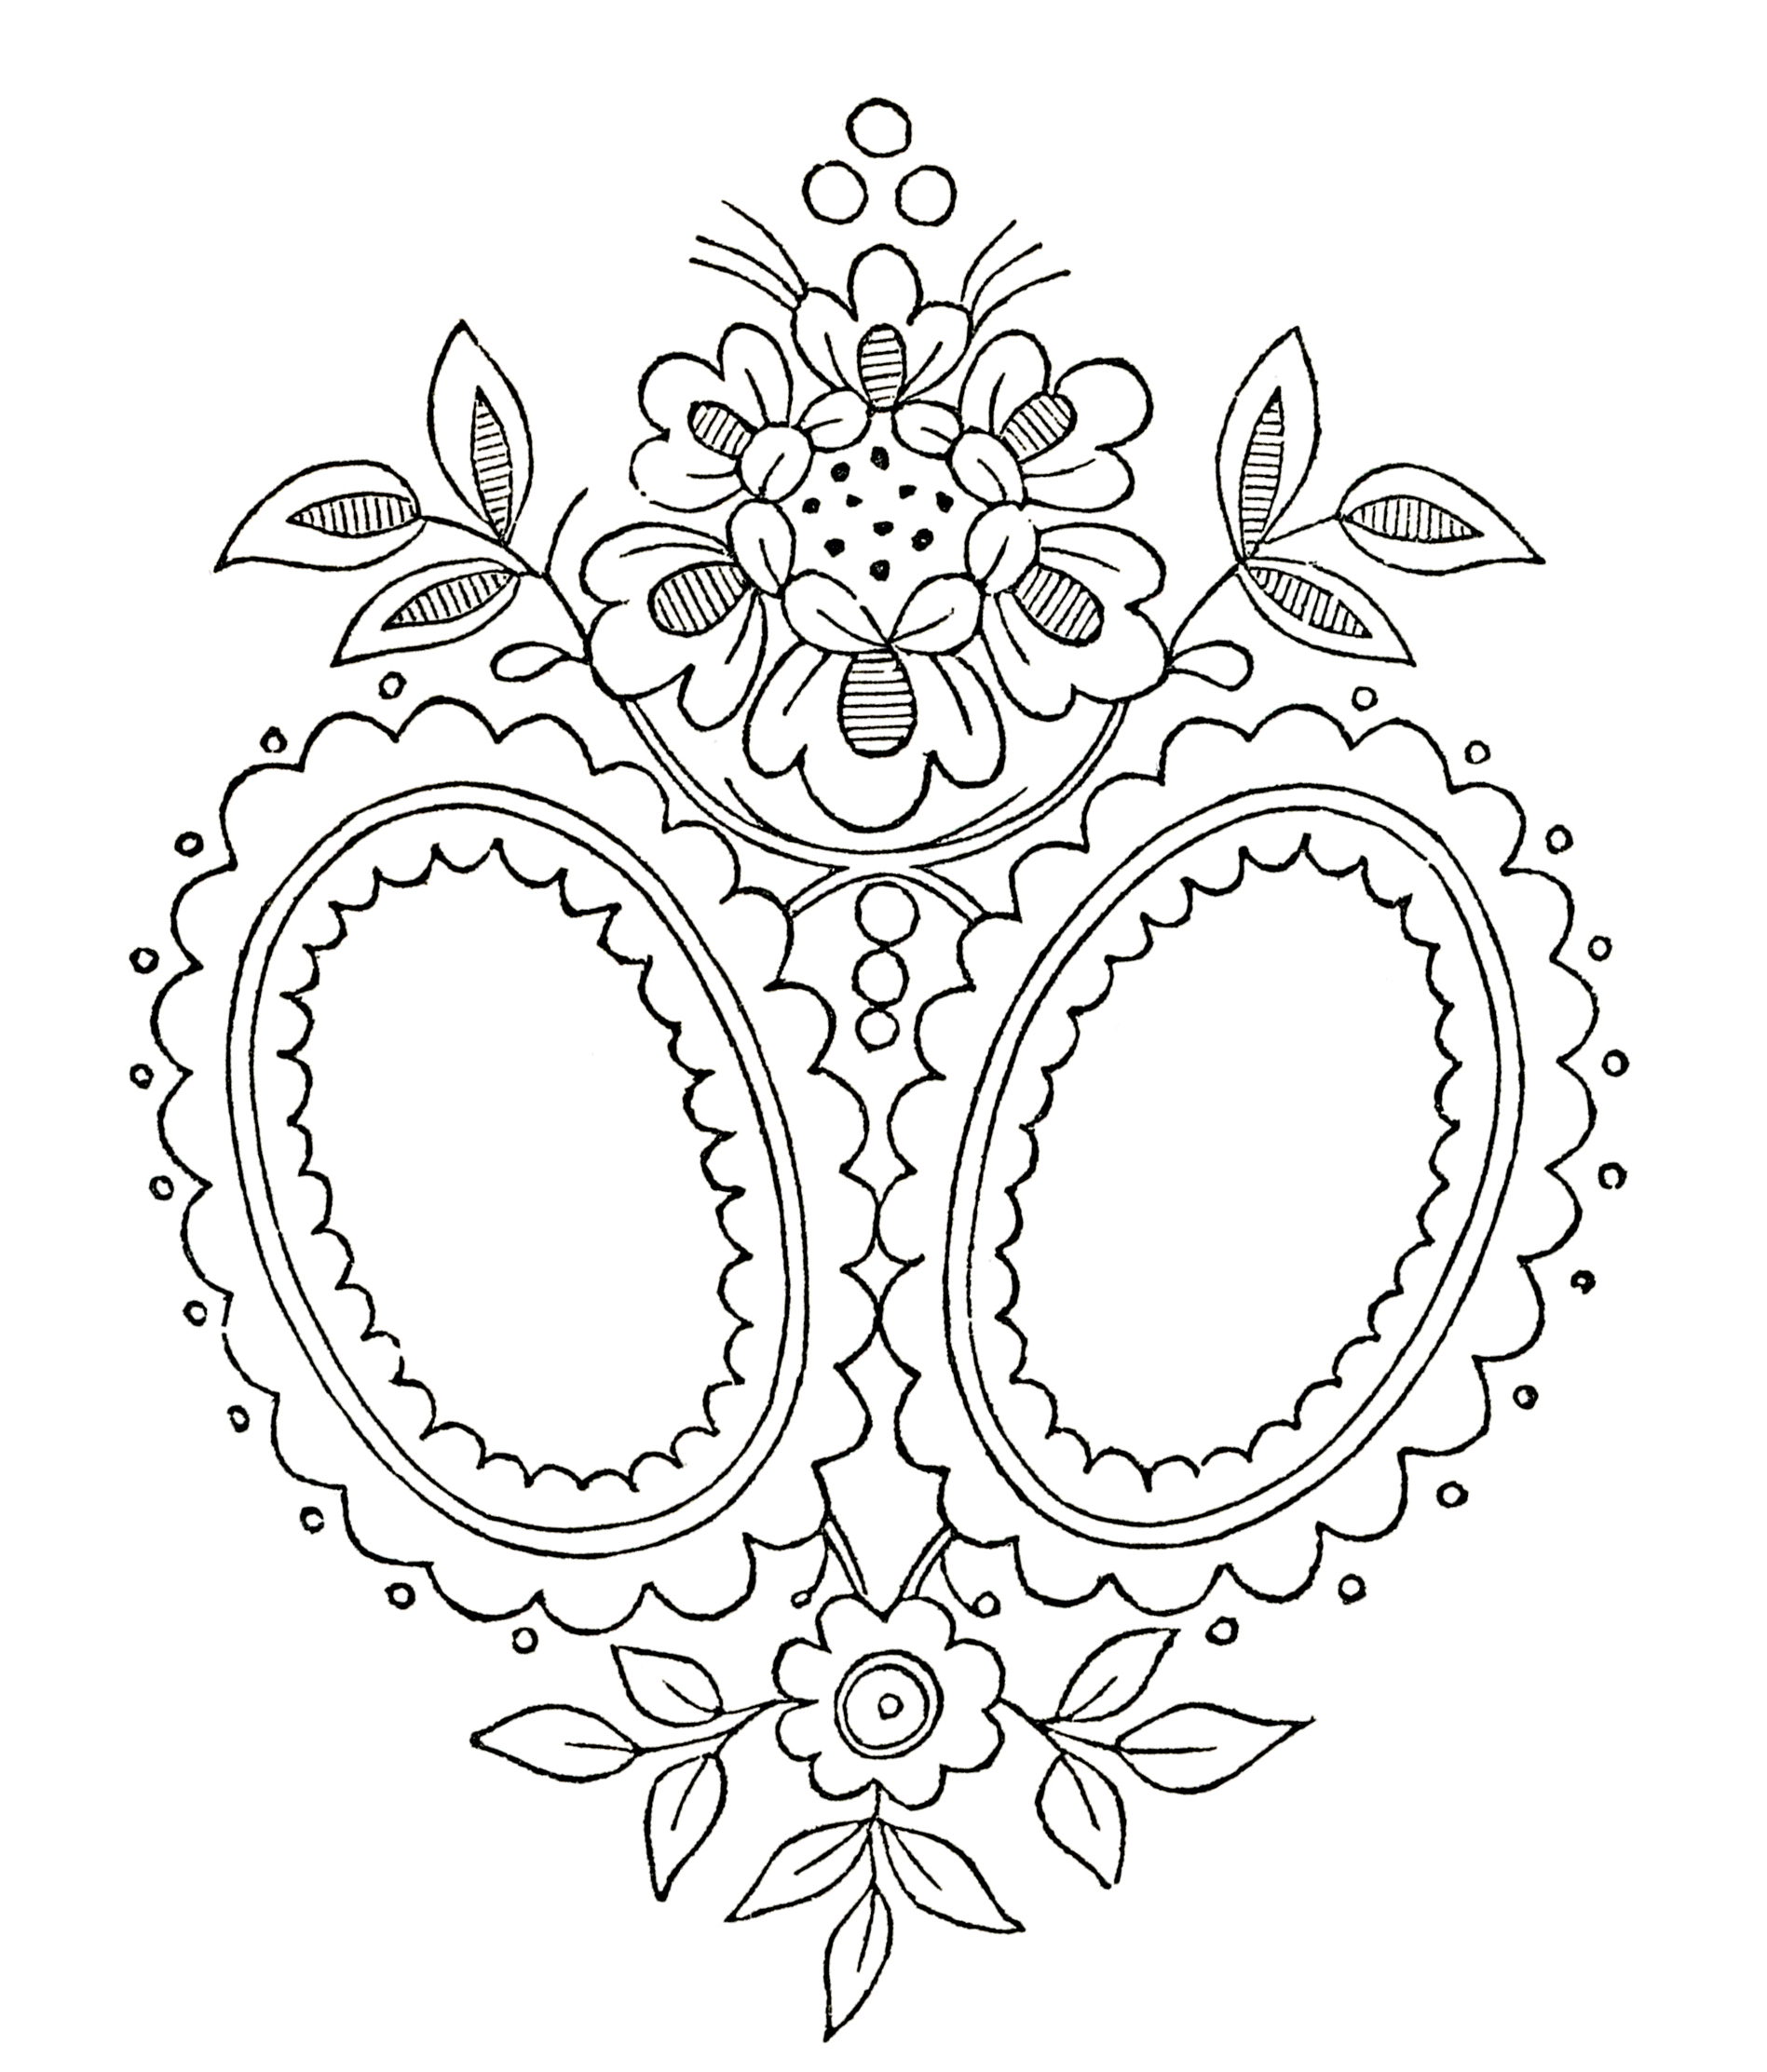 7 Printable Flower Embroidery Patterns The Graphics Fairy